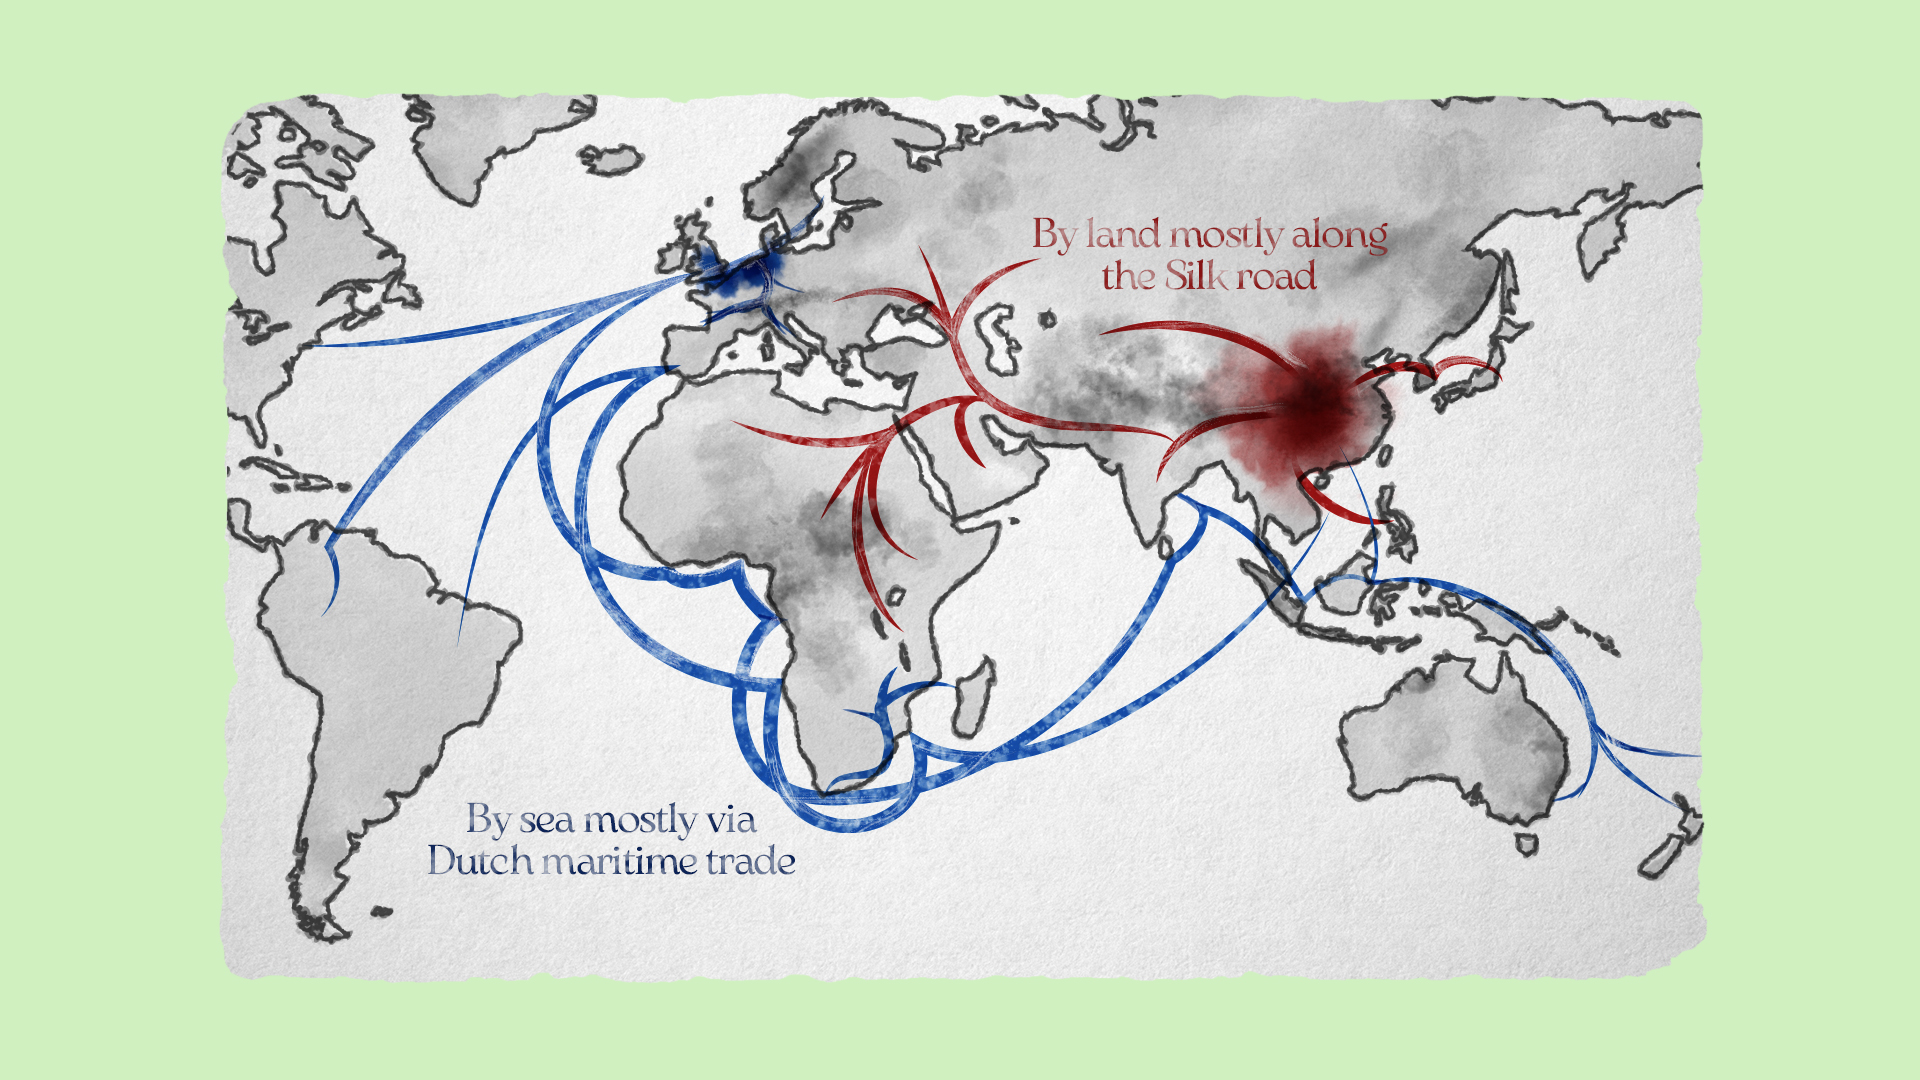 An illustration showing tea's journey out of China. Exported through Asia and across the world.